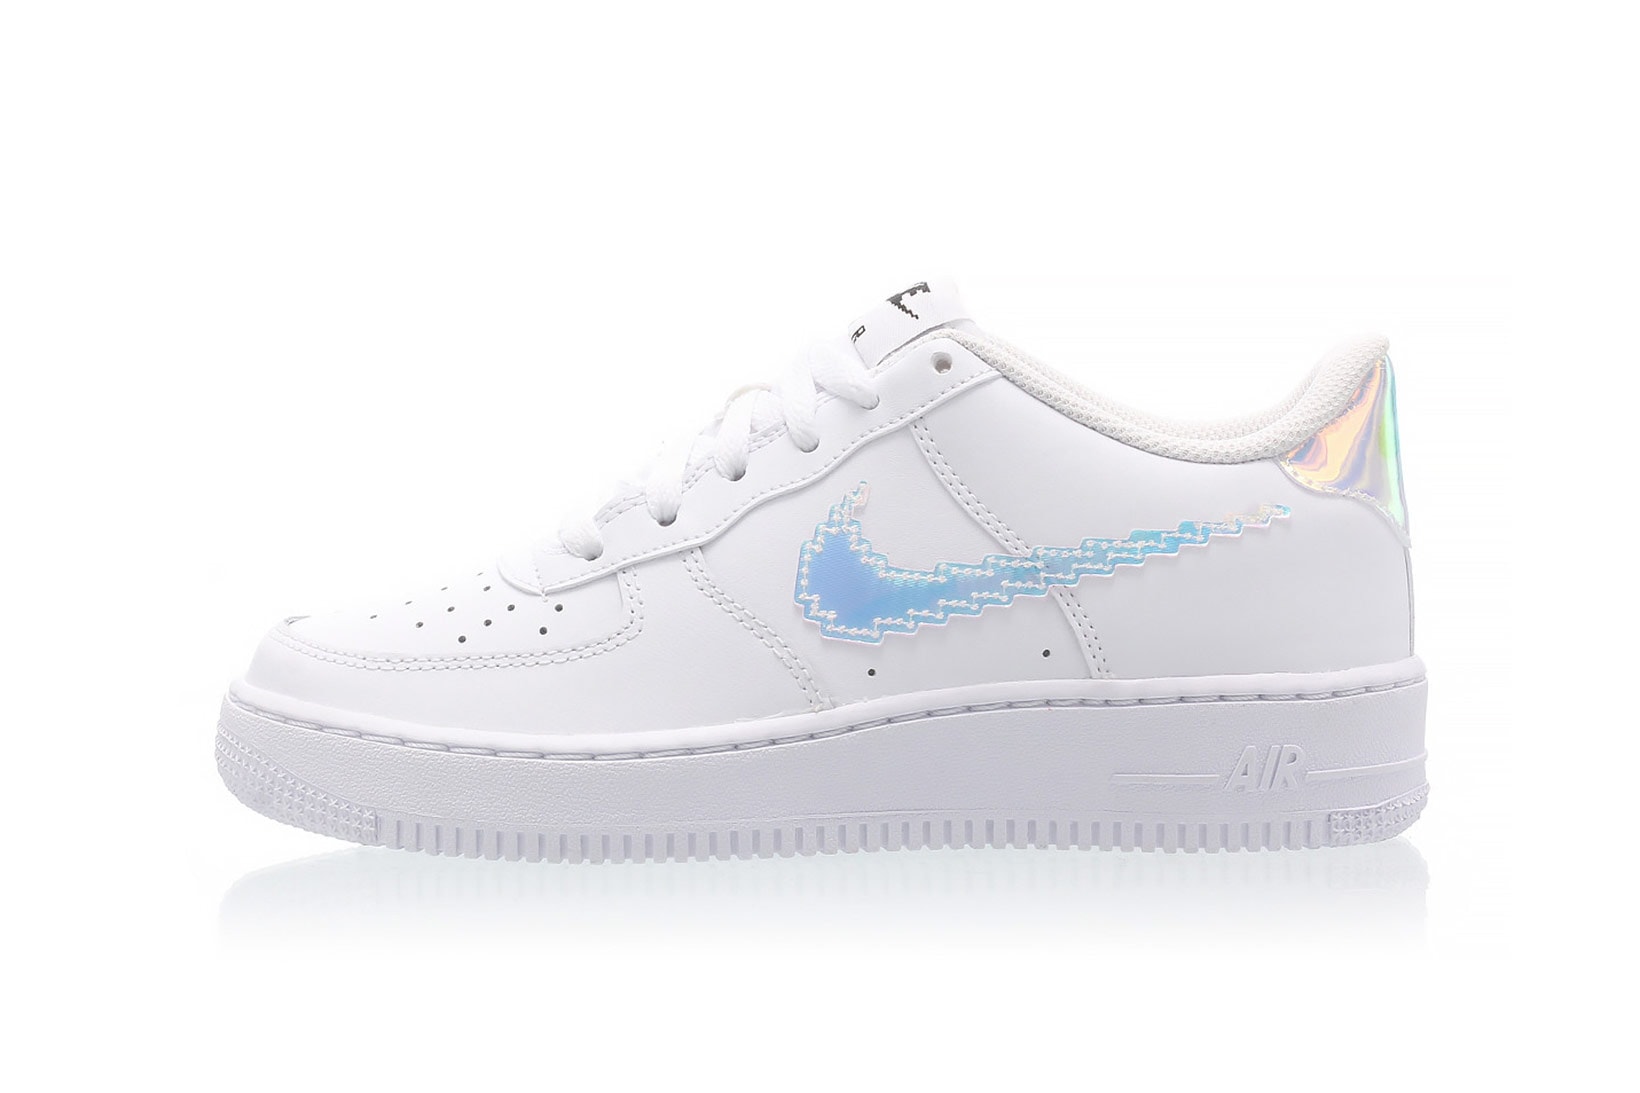 This Nike Air Force 1 was made for beer lovers